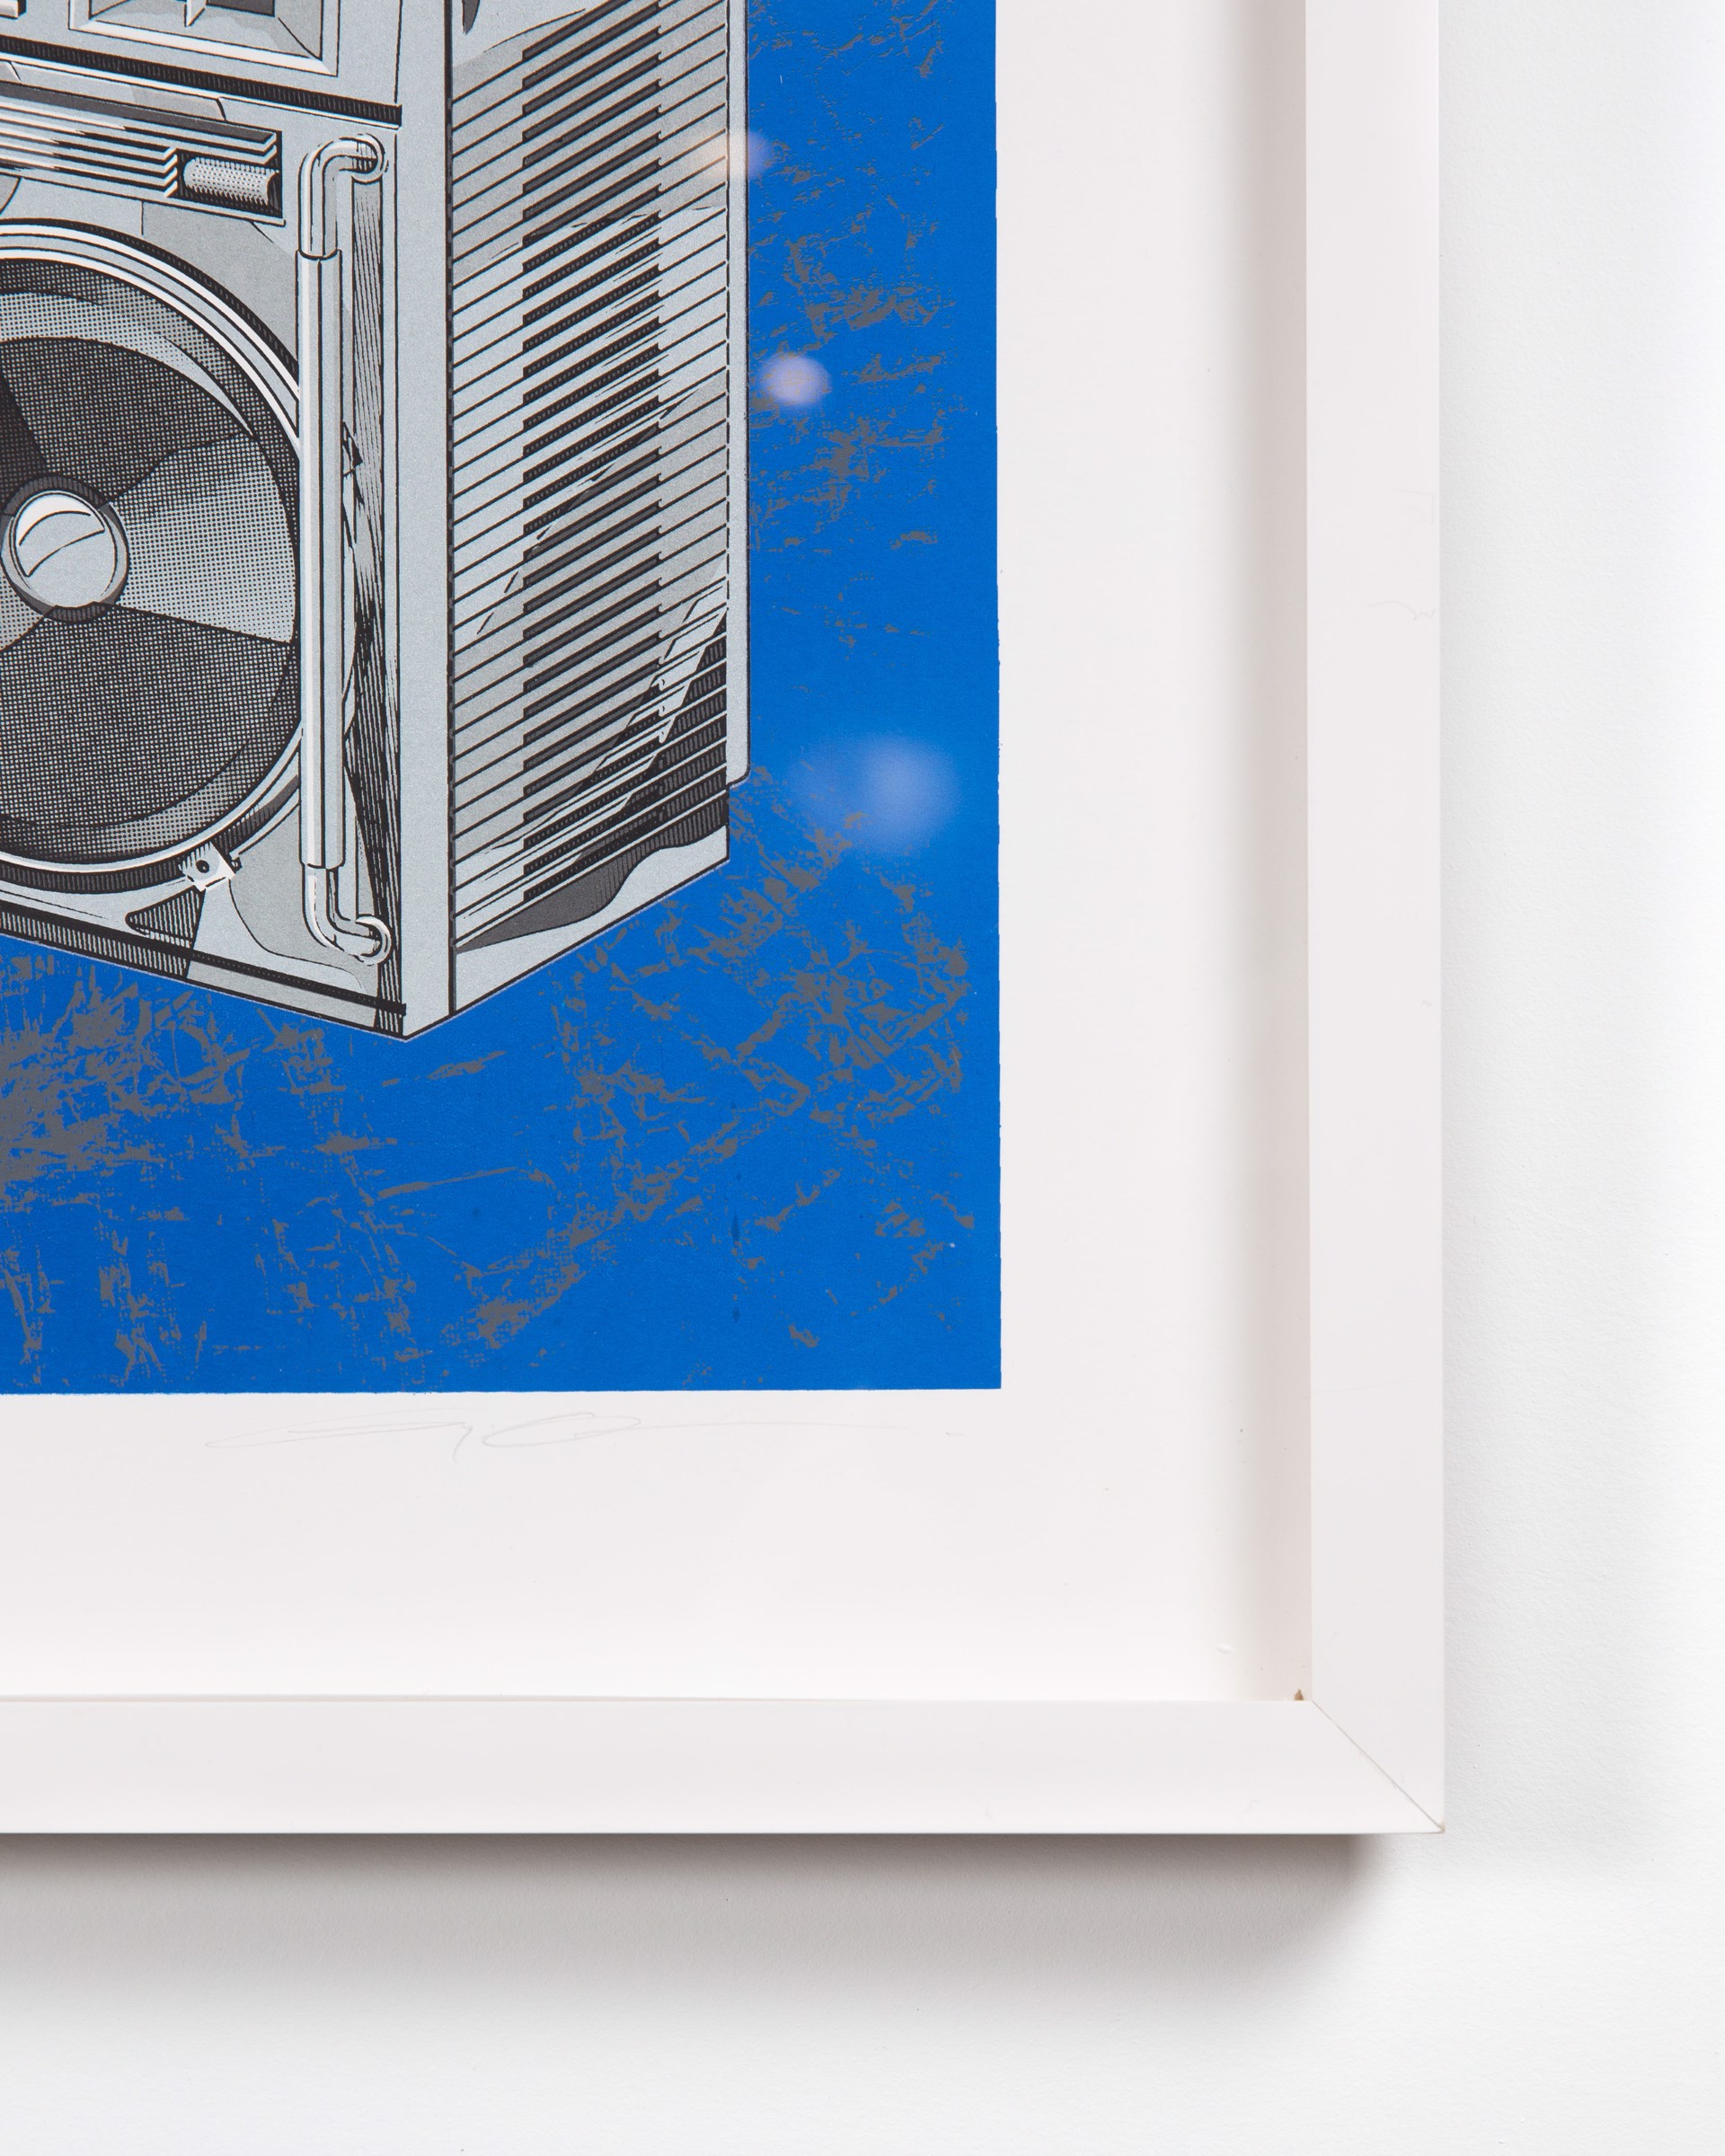 Cobalt Blue Box by Lyle Owerko | Boomboxes